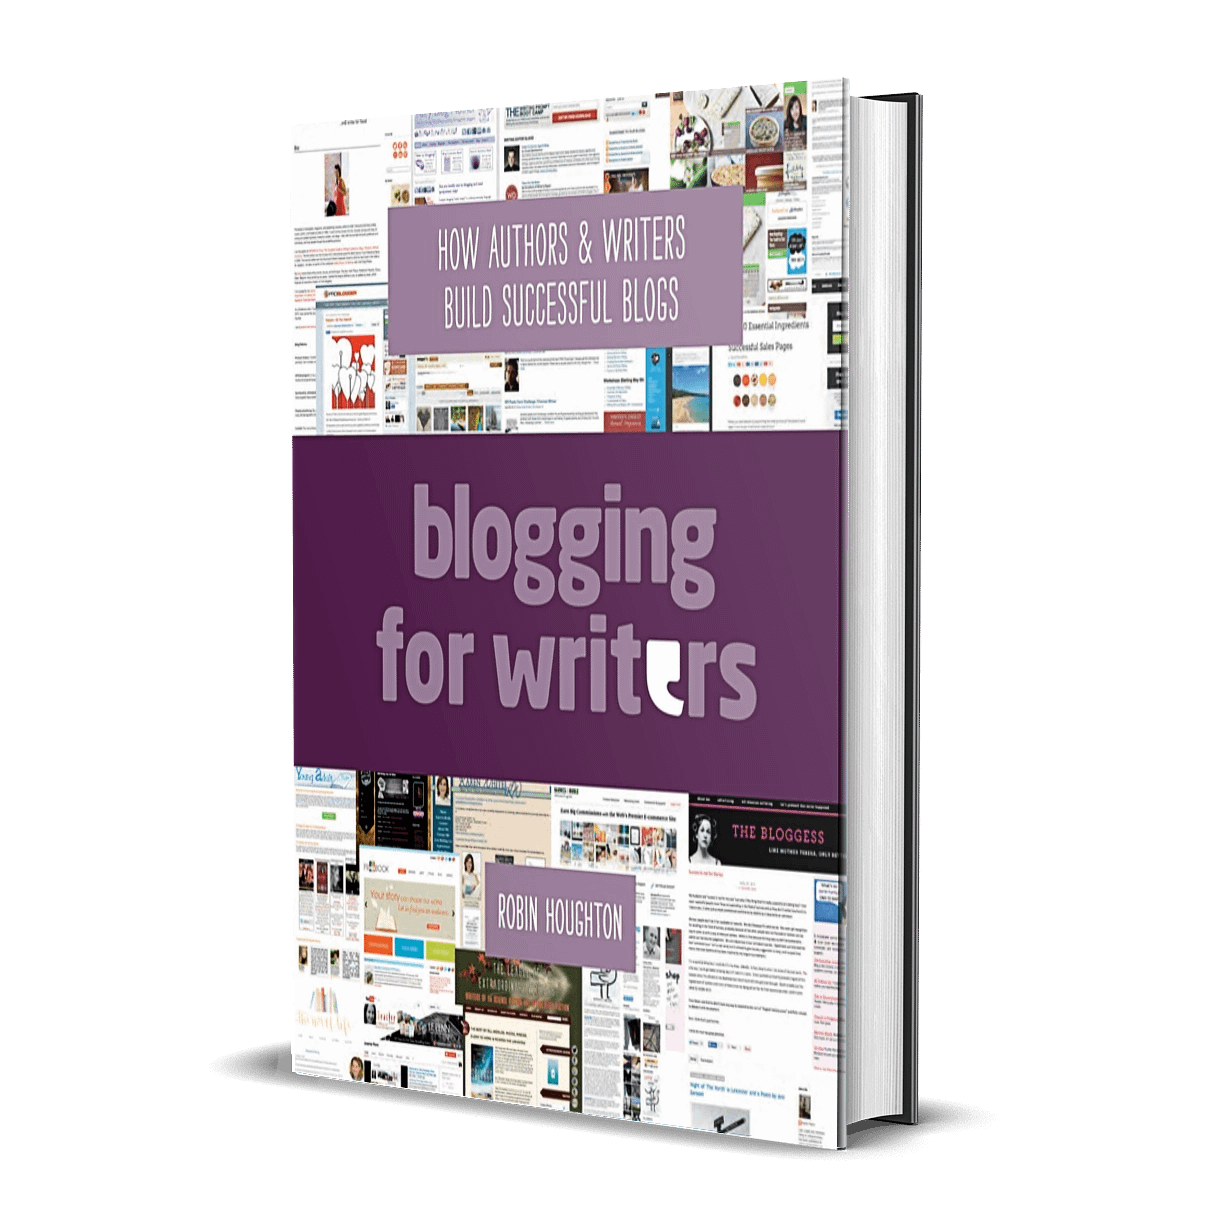 Blogging For Writers by Robin Houghton is among the best blogging books for authors looking to transition into blogging.